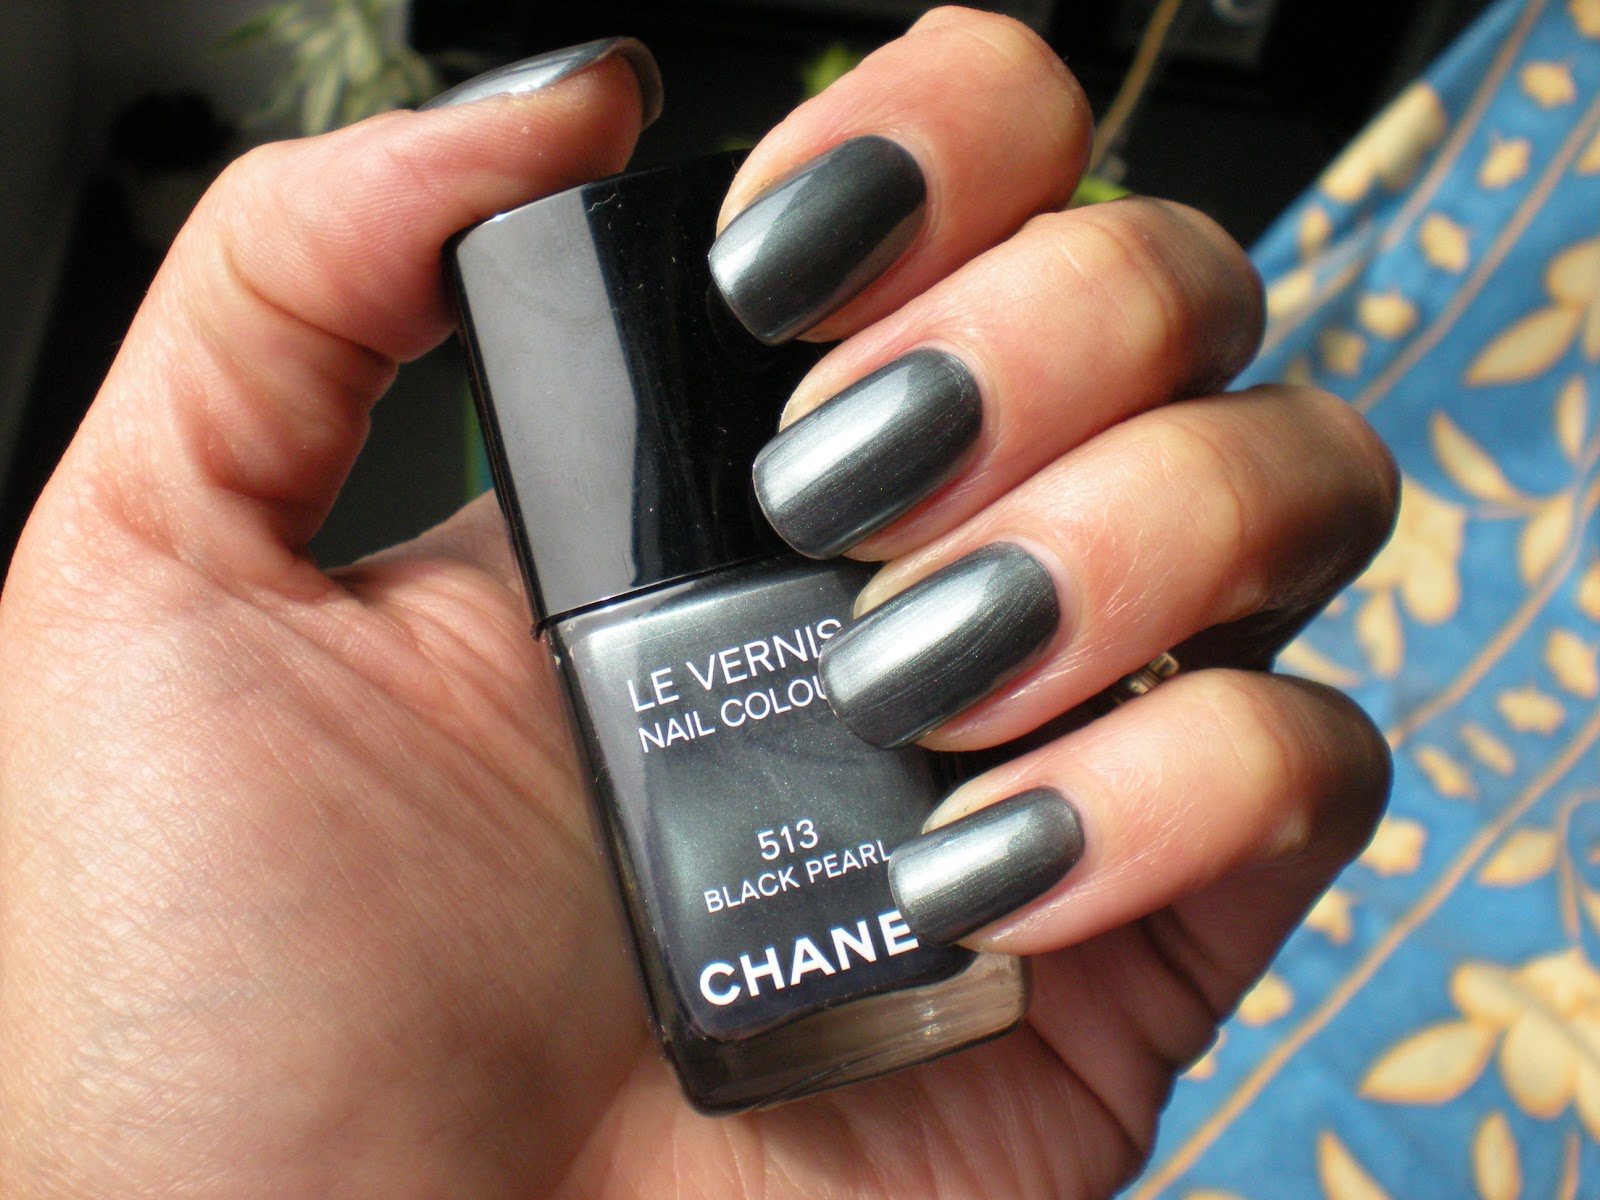 Chanel on your nails #2, Page 360